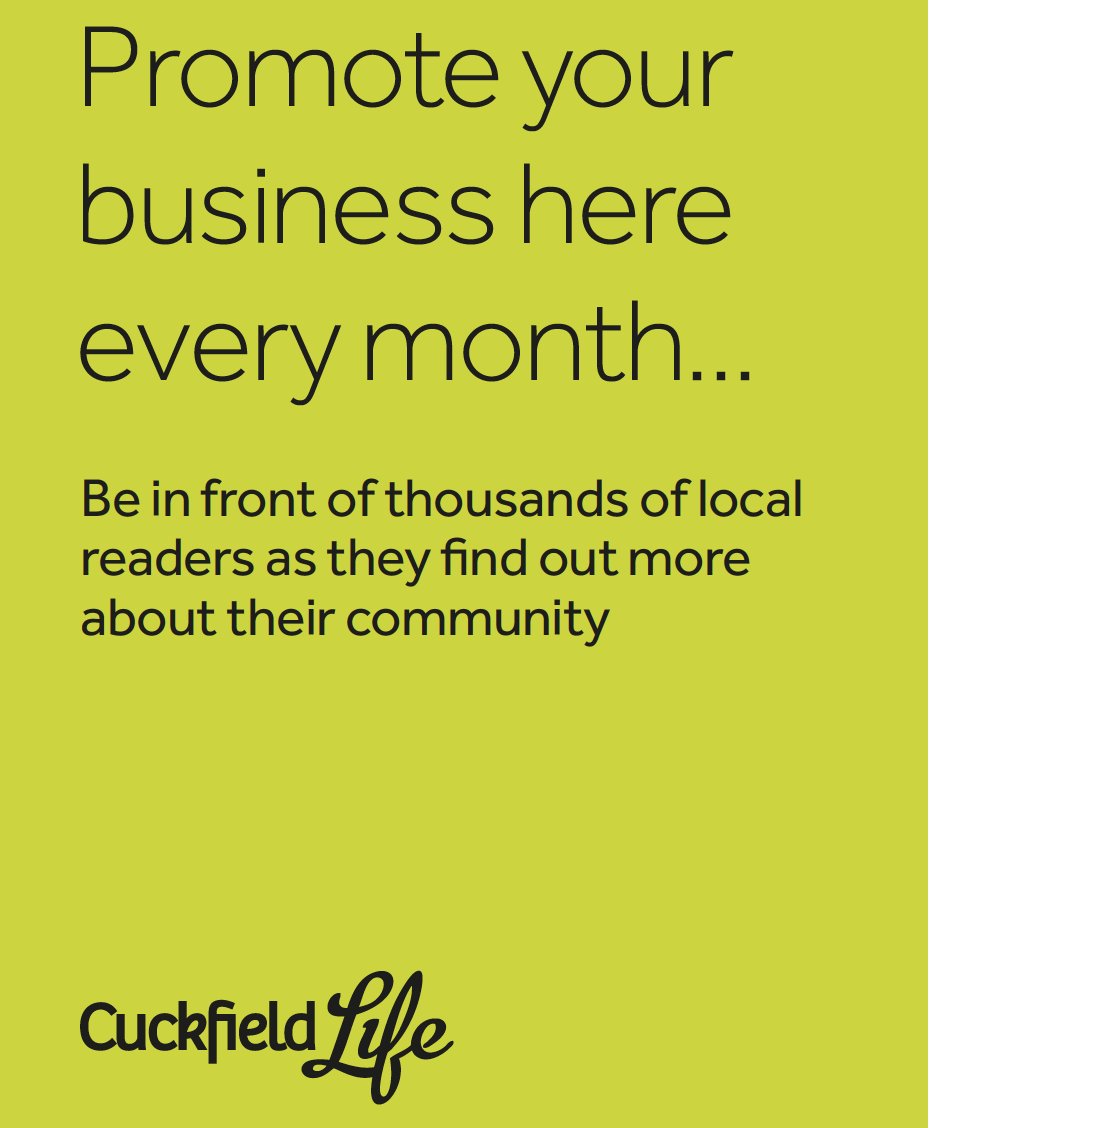 There's still time to get your business in our next issue of our #communitymagazine for #Cuckfield - Email Sophie ads@kipperlife.com before Tues 2nd May.

#advertising #localbusiness #midsussex #marketing #communitynews #haywardsheath